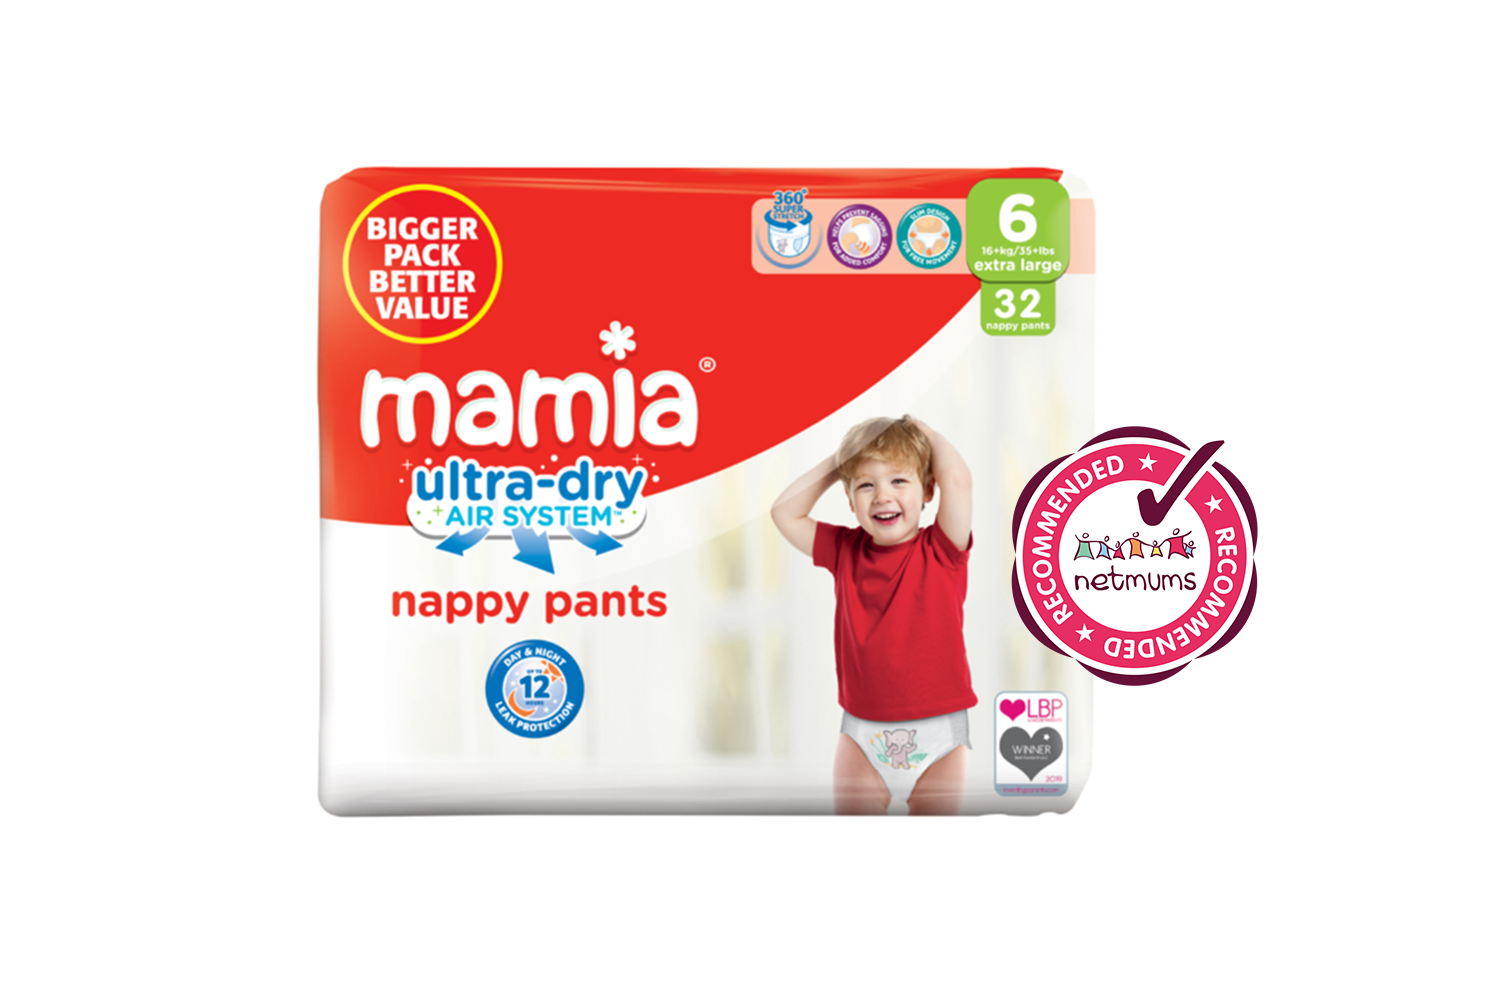 Aldi Mamia Size 7 Nappy Pants Are Netmums Recommended  Netmums